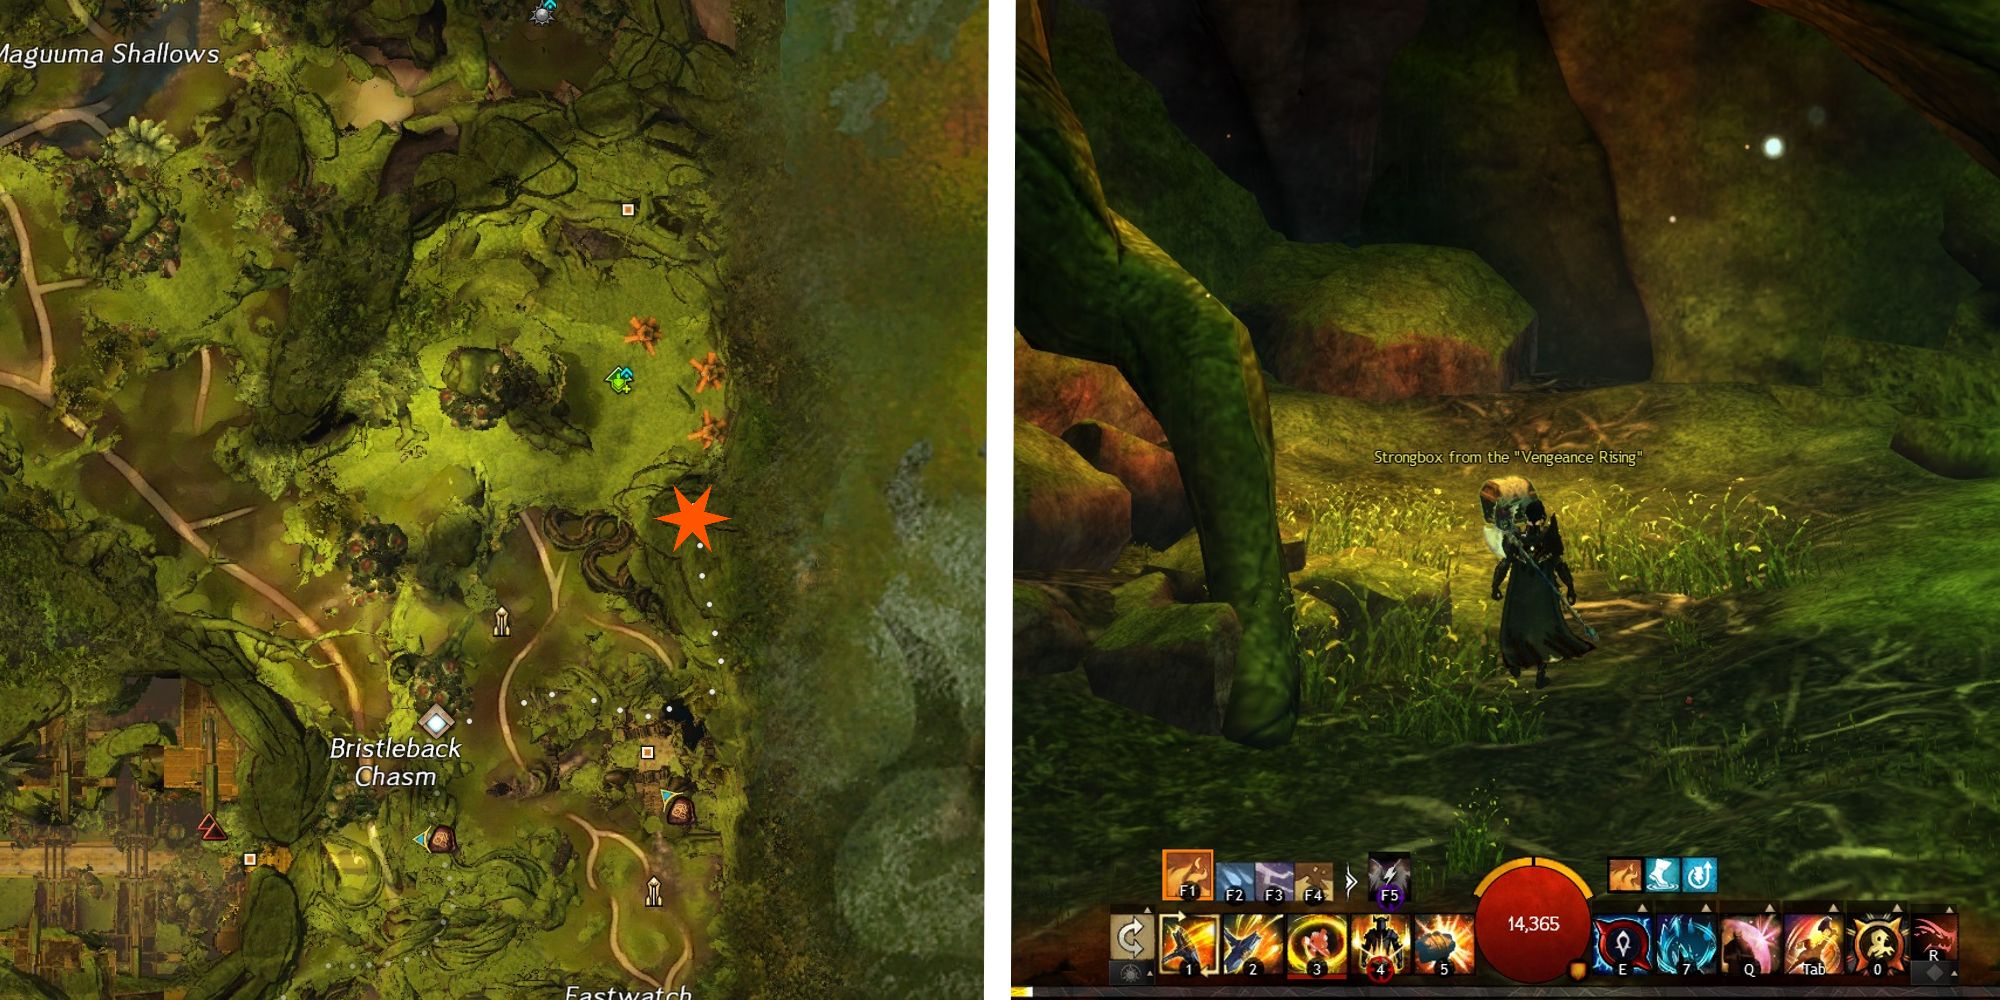 vengance rising strongbox marked on map next to image of player standing at box